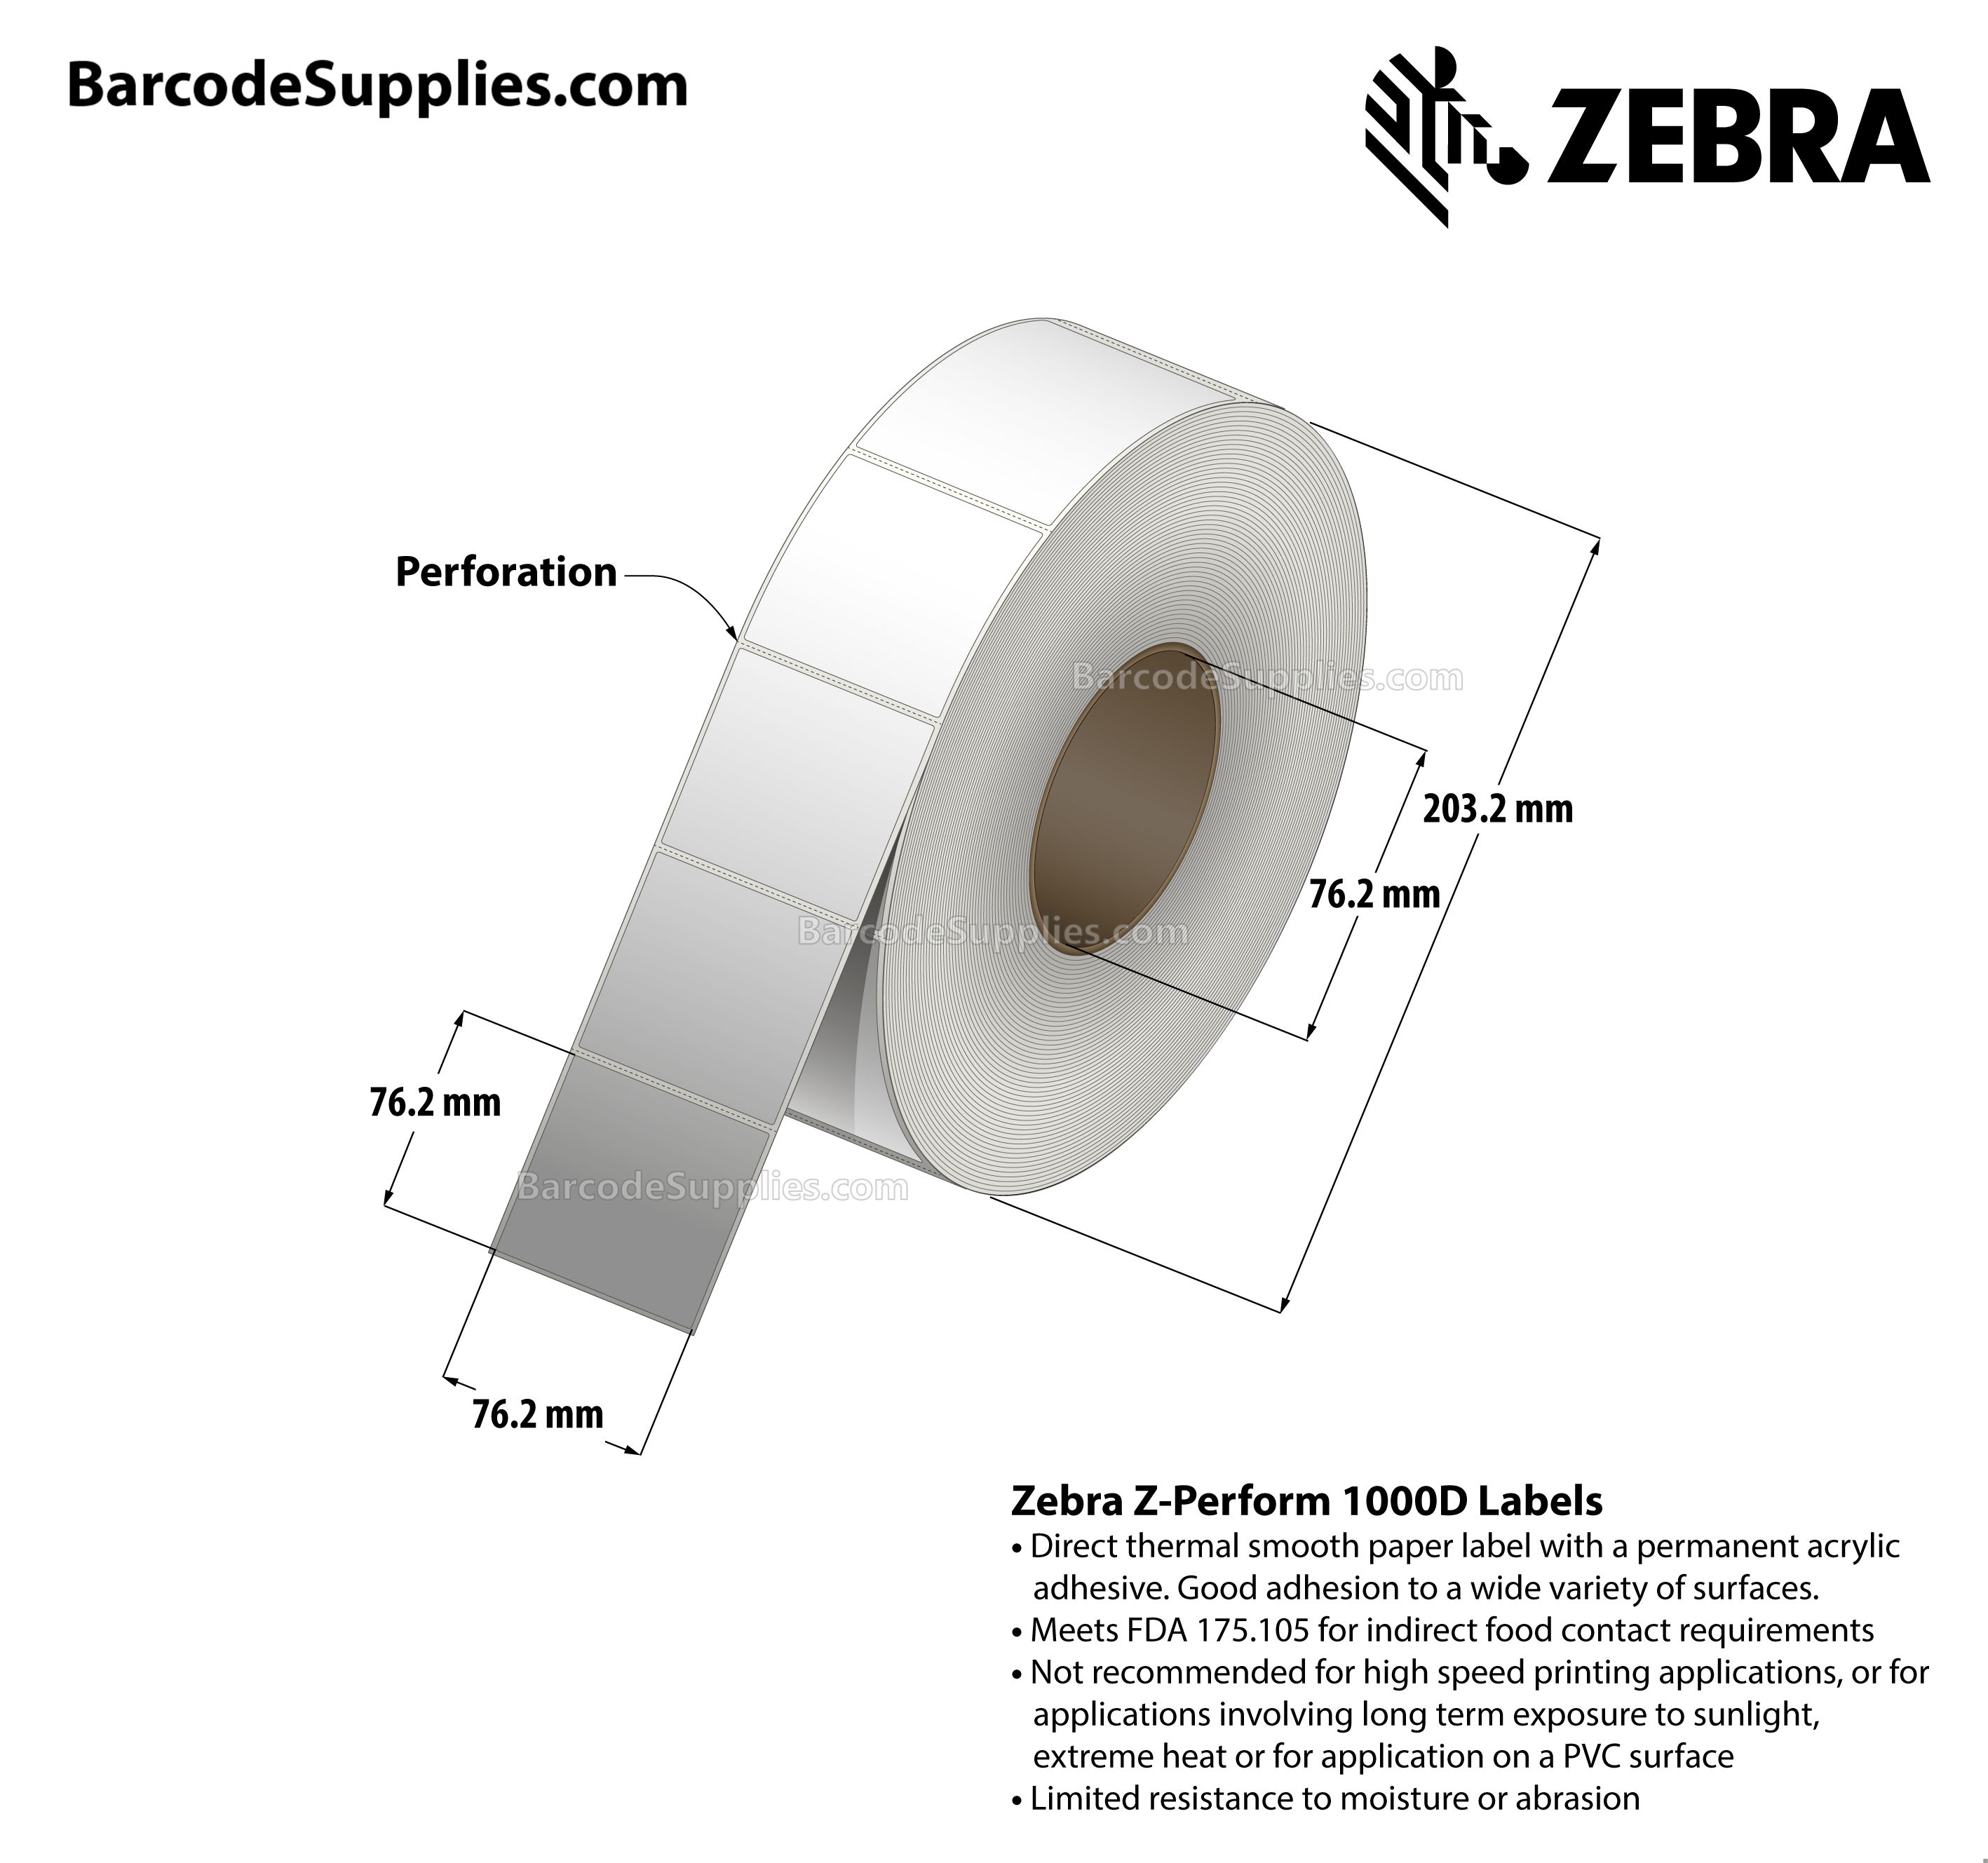 3 x 3 Direct Thermal White Z-Perform 1000D Labels With Permanent Adhesive - Perforated - 1880 Labels Per Roll - Carton Of 4 Rolls - 7520 Labels Total - MPN: 10028312